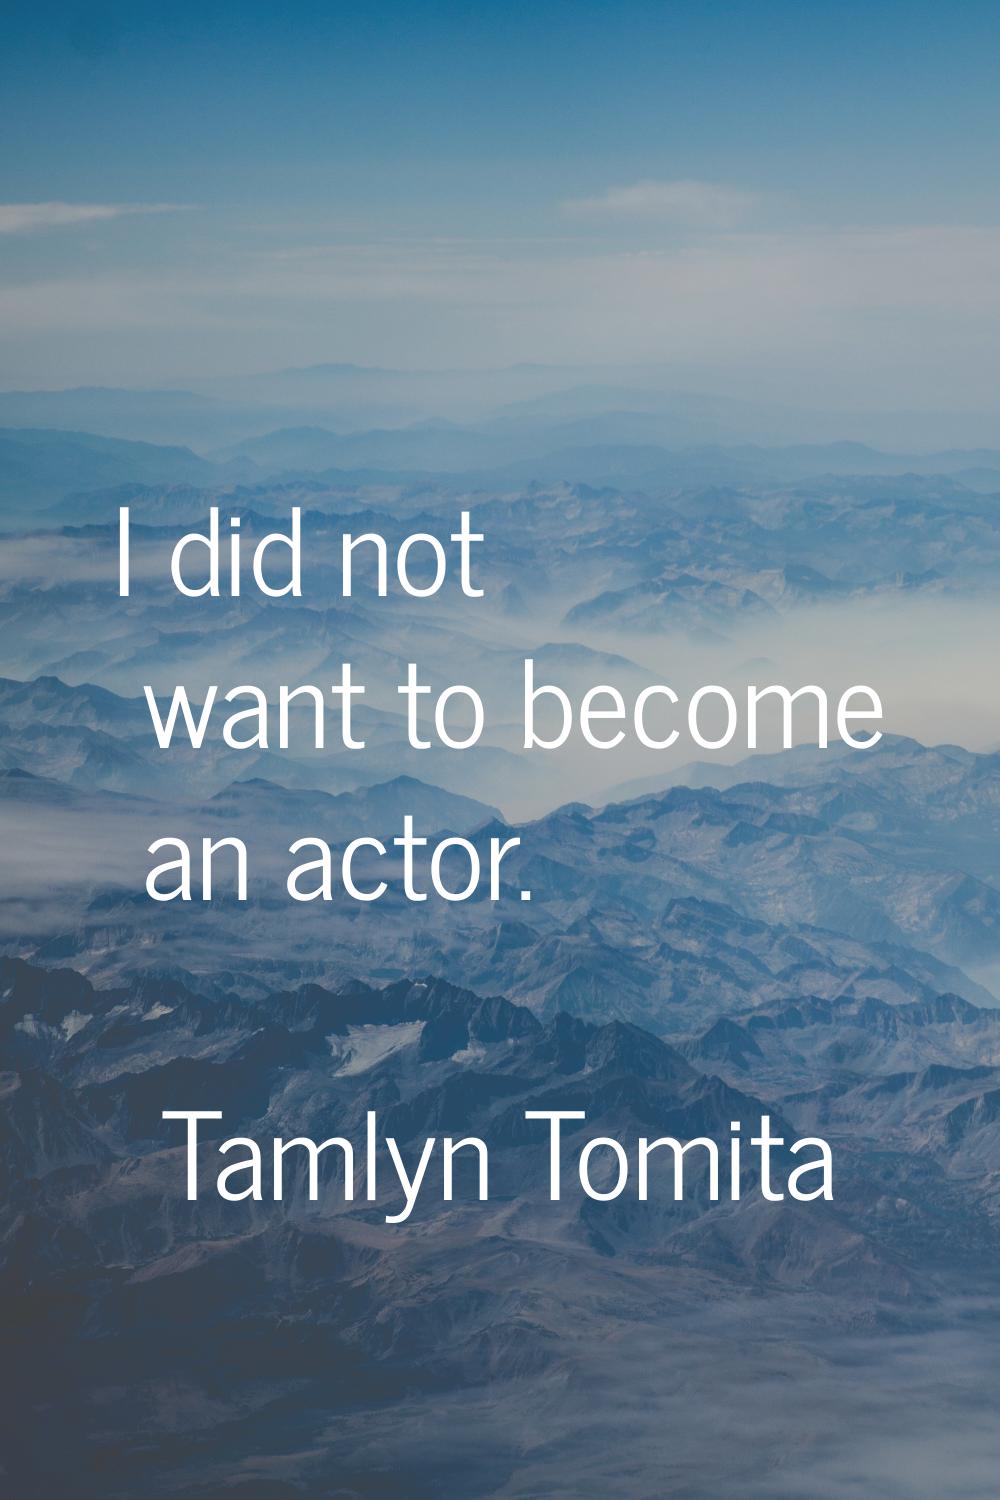 I did not want to become an actor.